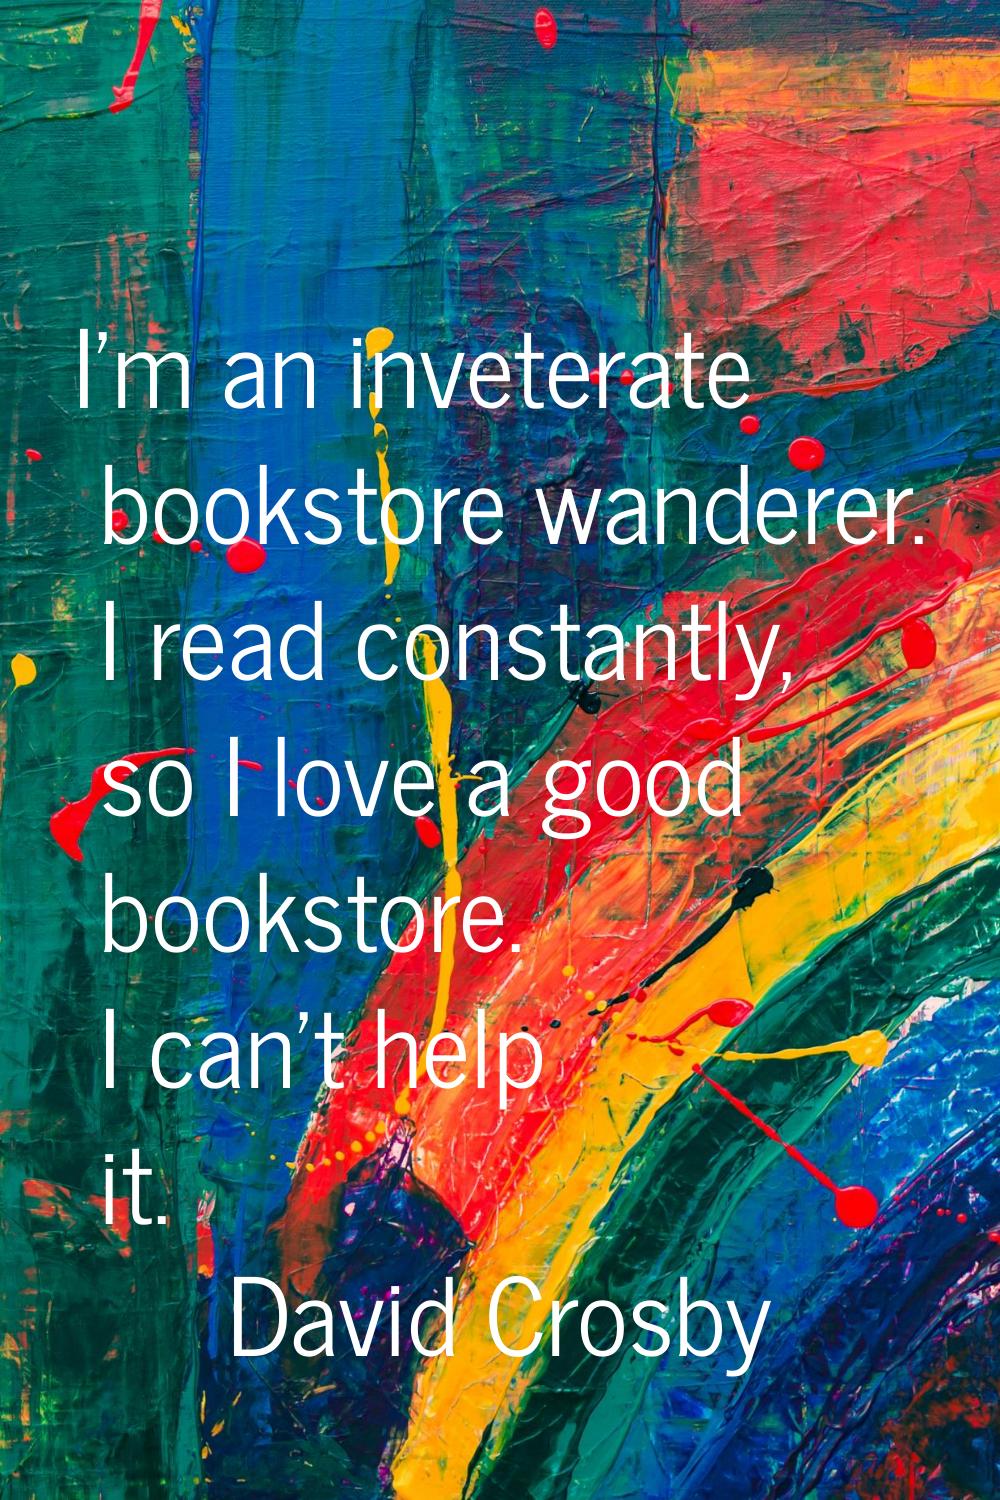 I'm an inveterate bookstore wanderer. I read constantly, so I love a good bookstore. I can't help i